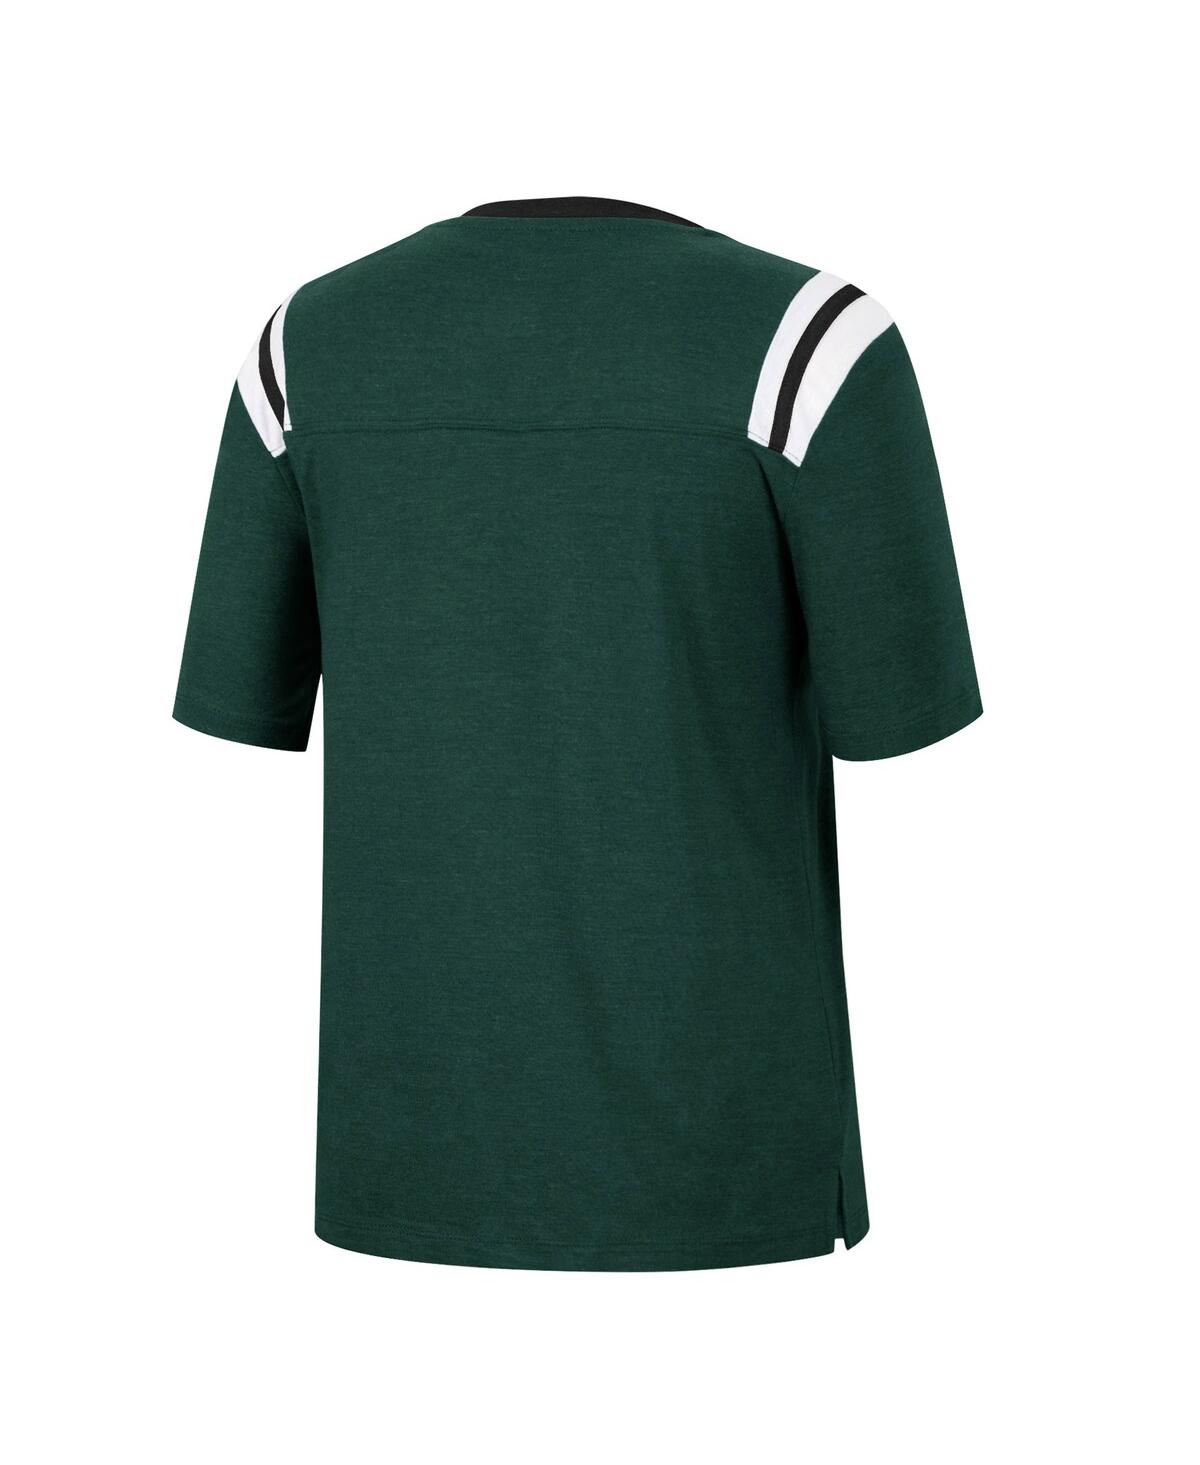 Shop Colosseum Women's  Heathered Green Michigan State Spartans 15 Min Early Football V-neck T-shirt